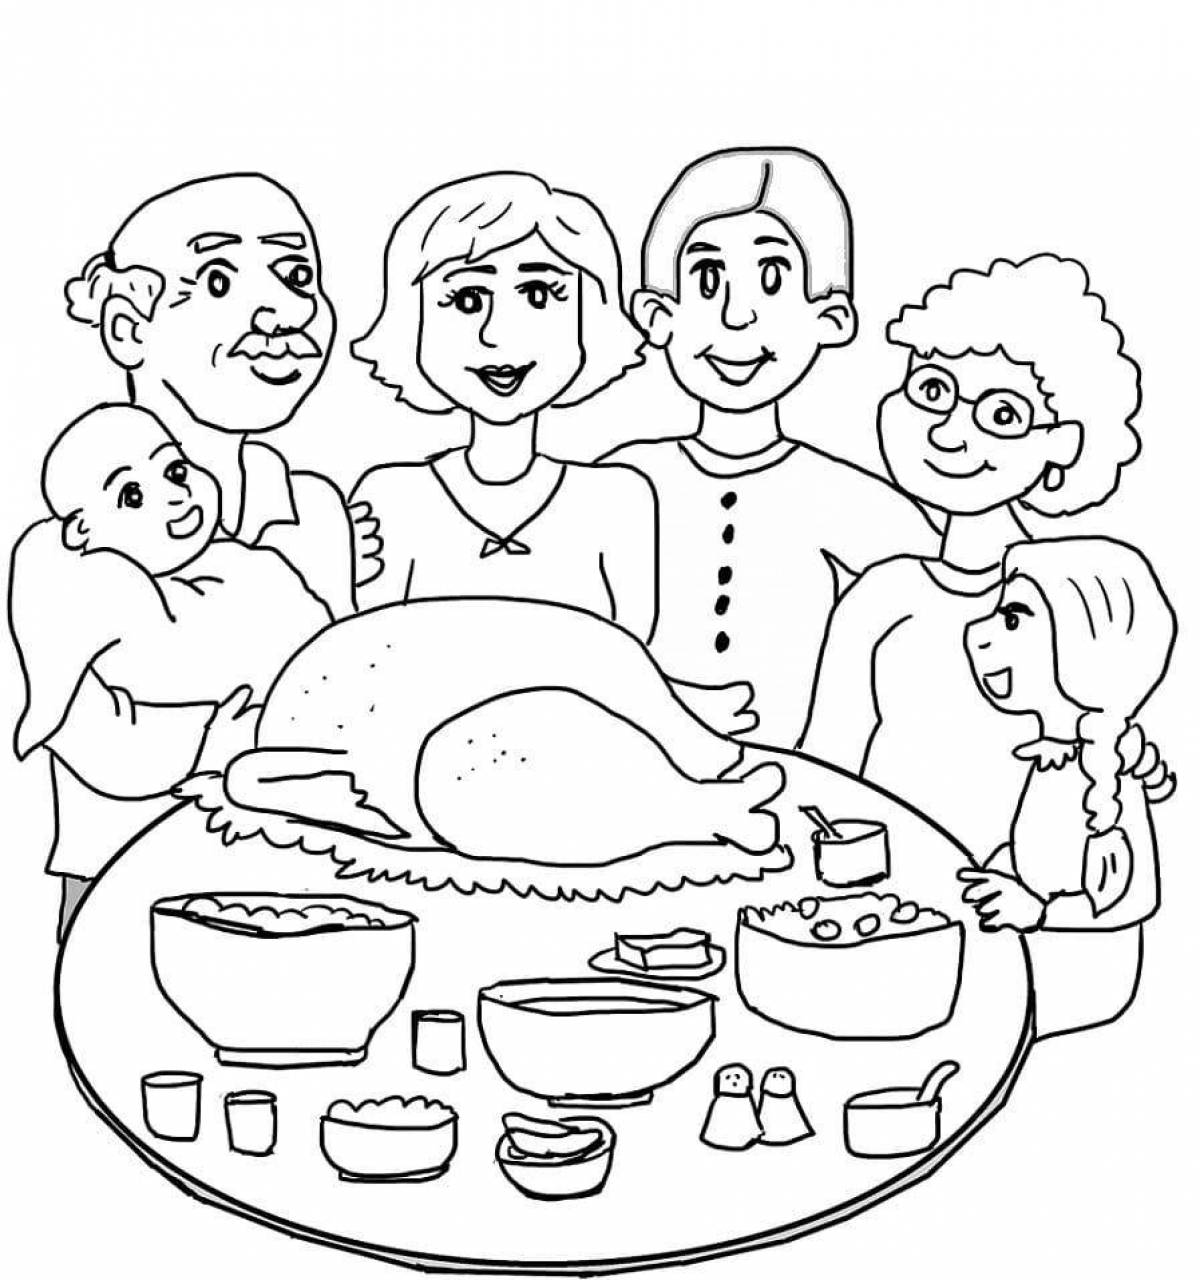 Innovative family of 5 coloring page